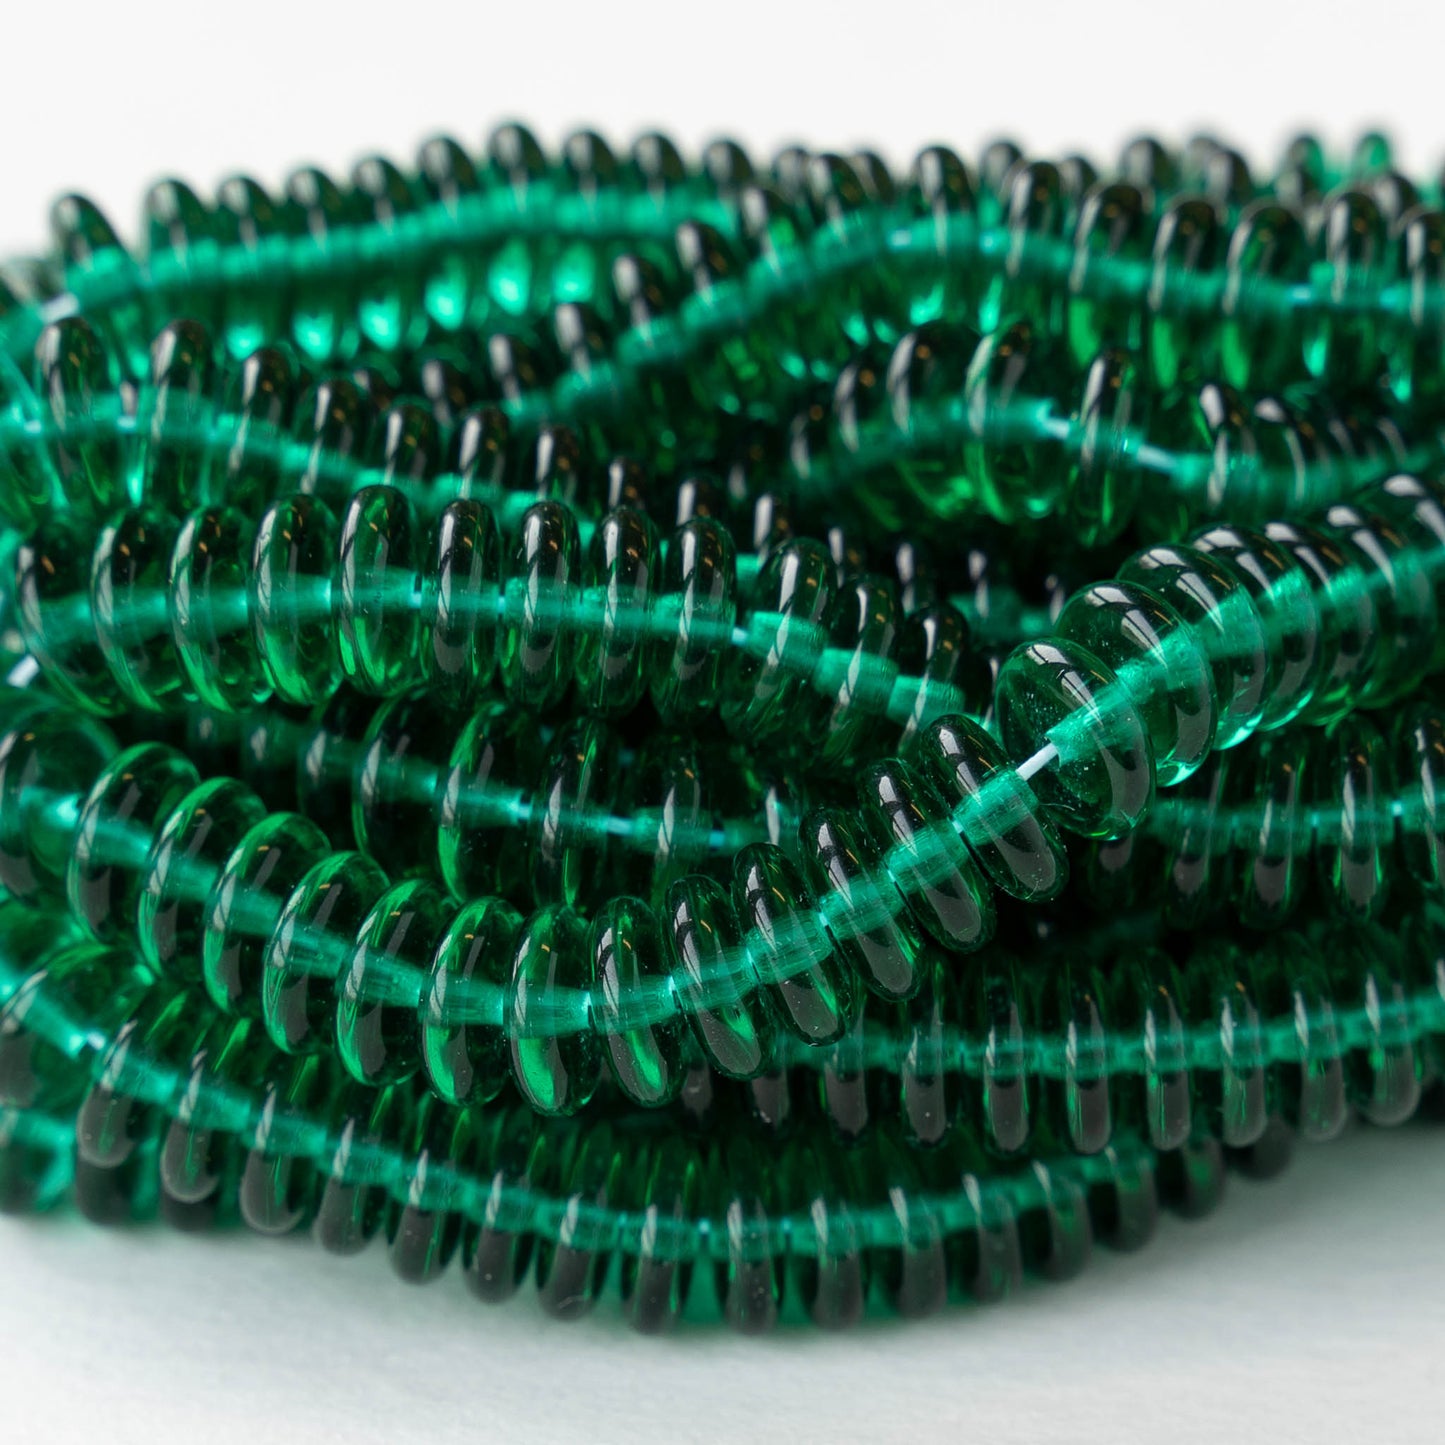 8mm Glass Rondelle Beads - Emerald Green - 30 Beads